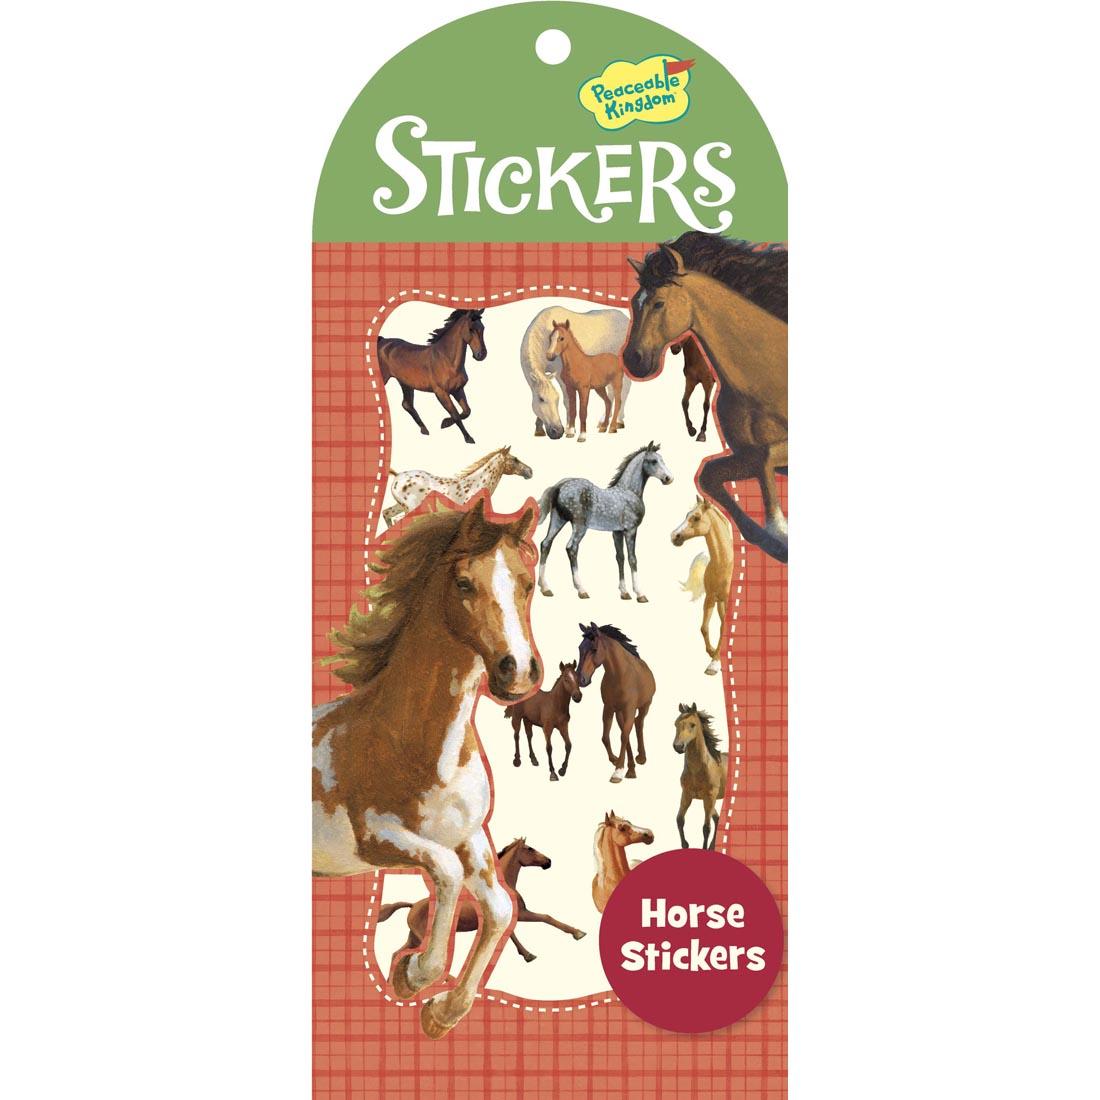 Horse Stickers by Peaceable Kingdom